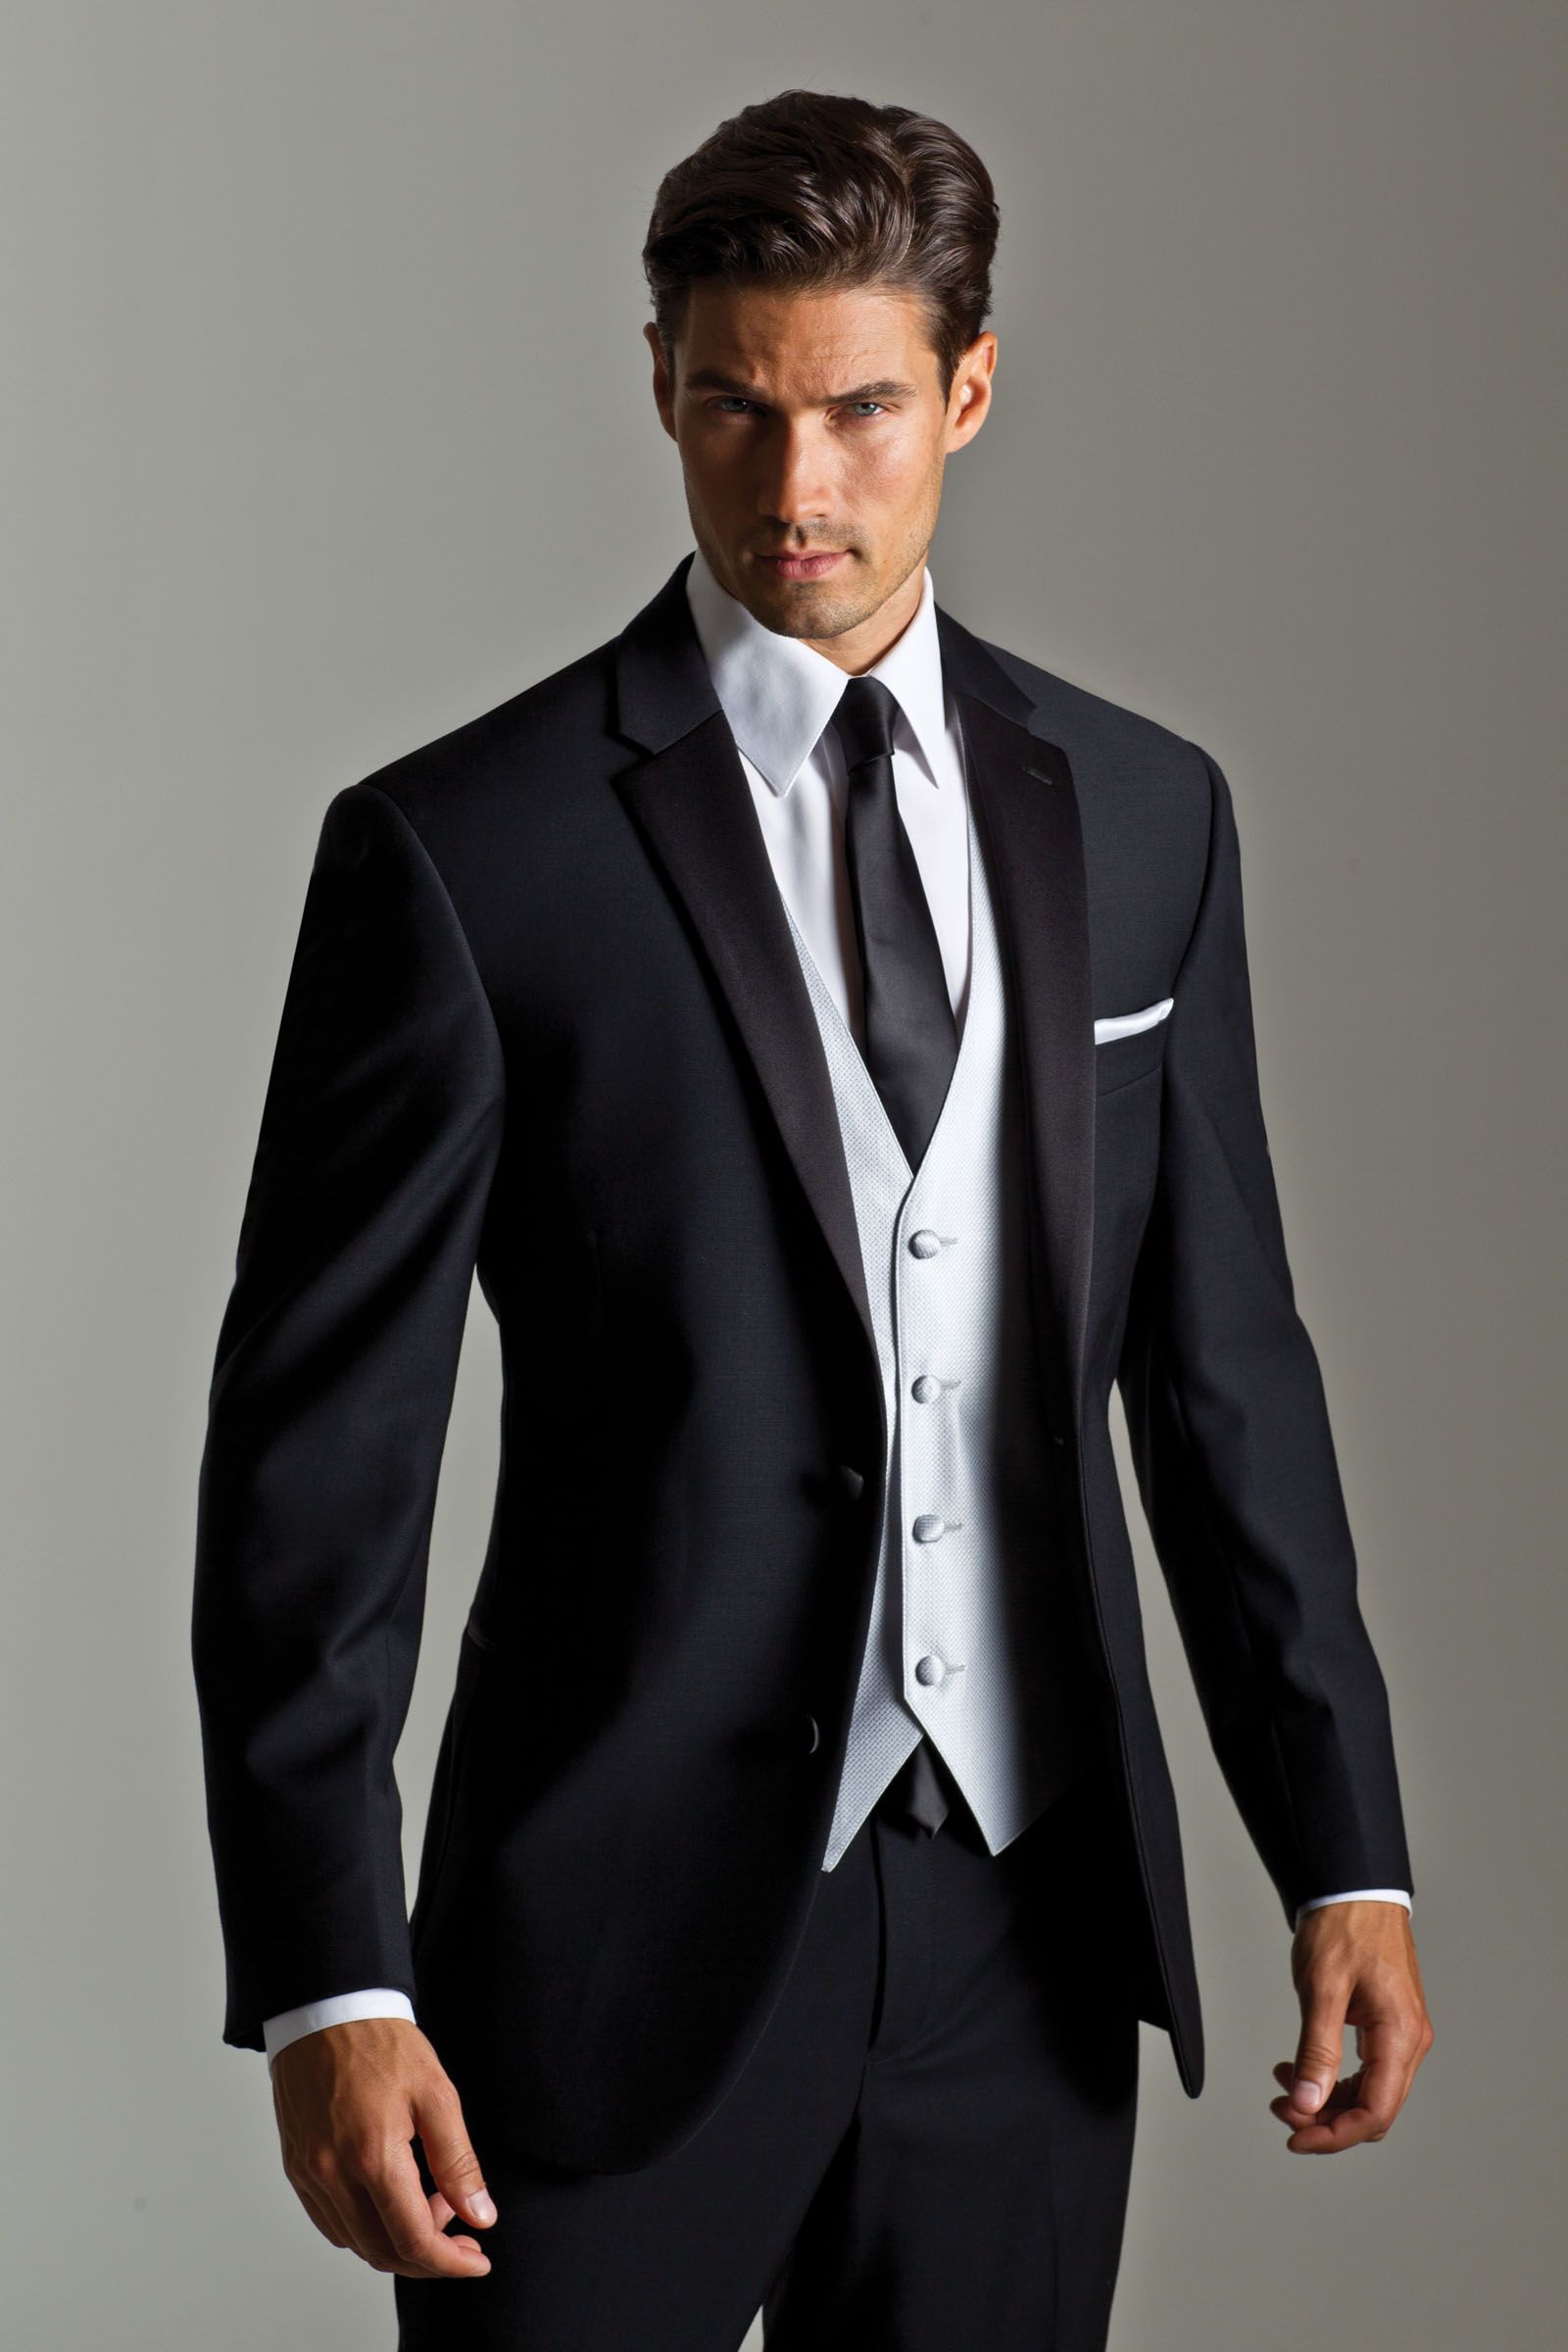 Custom Made Black Wedding Suits For Men Tuxedos Notched